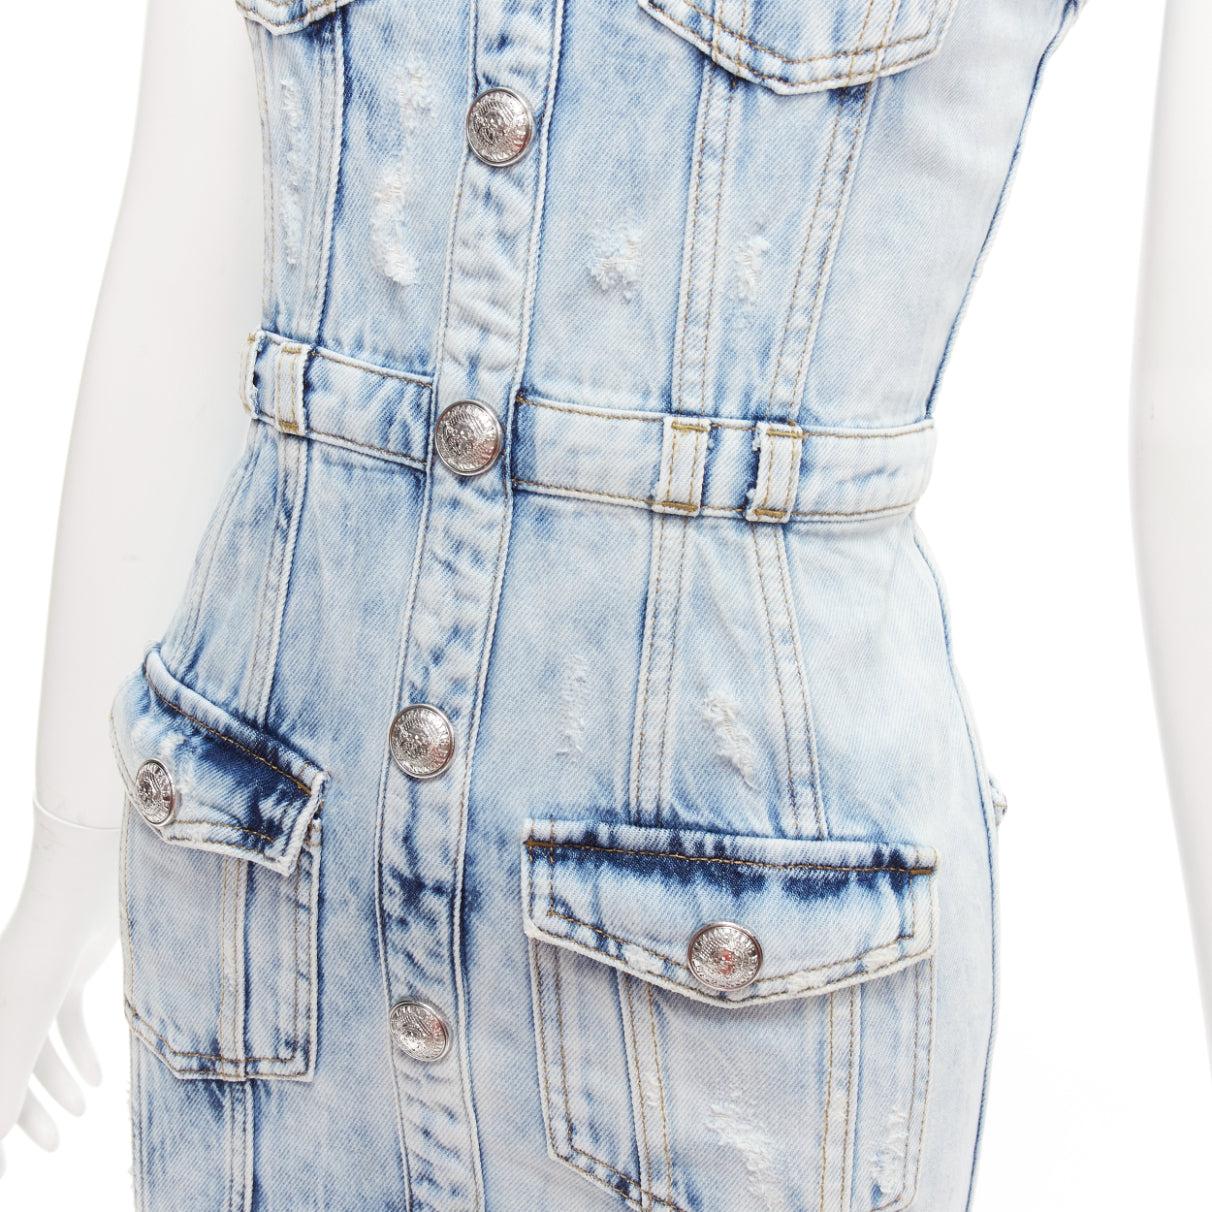 BALMAIN faded blue distressed denim silver buttons 4 pocket fitted dress FR34 XS
Reference: YIKK/A00099
Brand: Balmain
Designer: Olivier Rousteing
Material: Denim
Color: Blue
Pattern: Washed
Closure: Zip
Extra Details: Sleeveless non-stretch denim